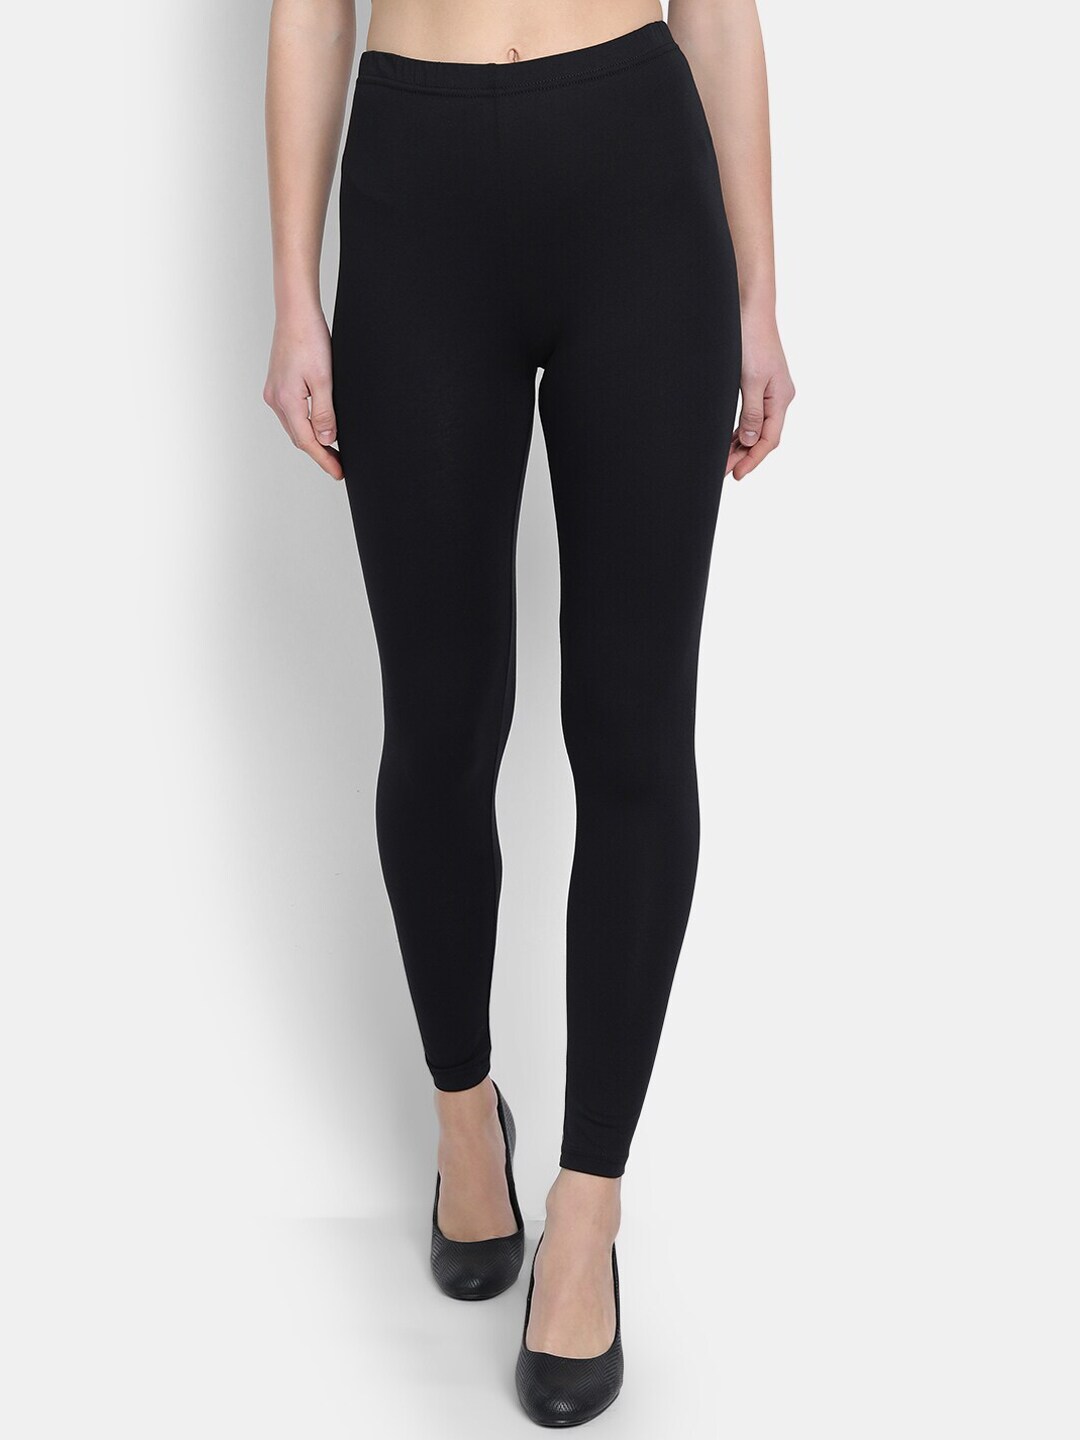 fabGLOBAL Women Black Solid Ankle Length Leggings Price in India